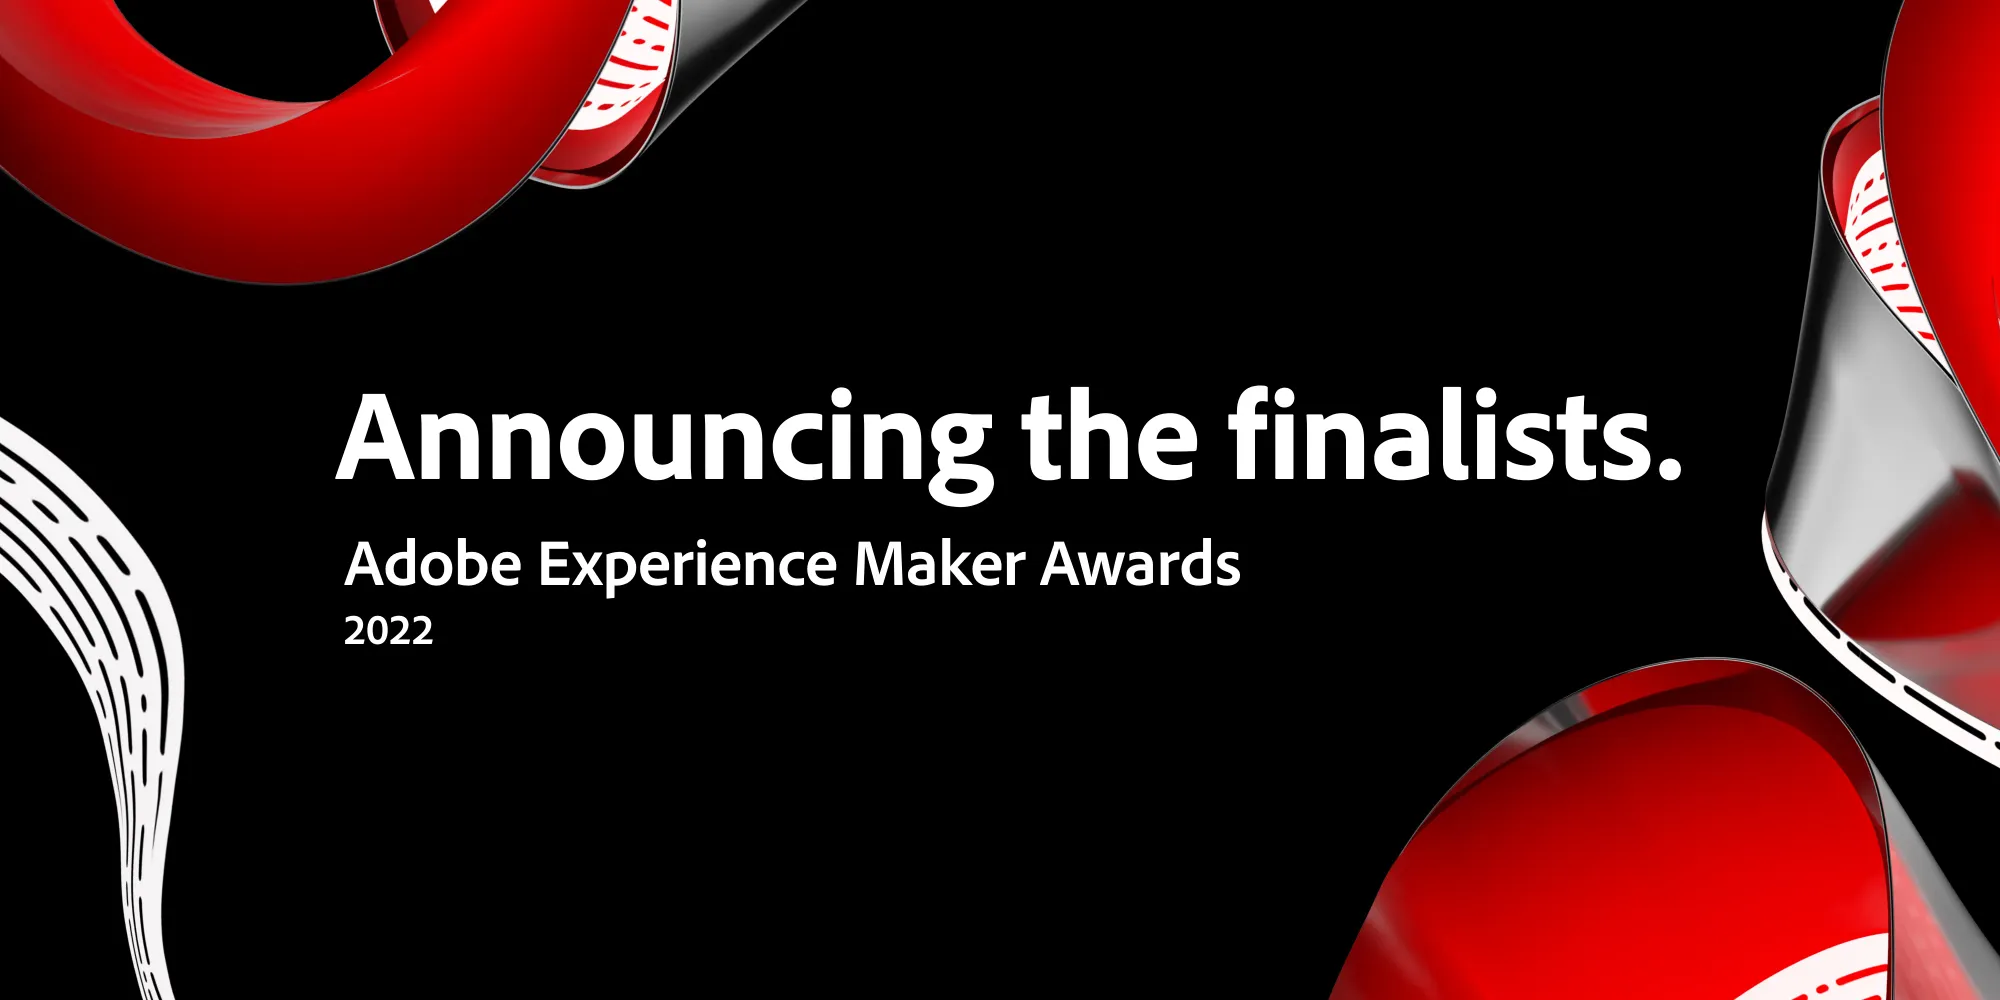 Announcing the finalists. Adobe Experience Maker Awards 2022